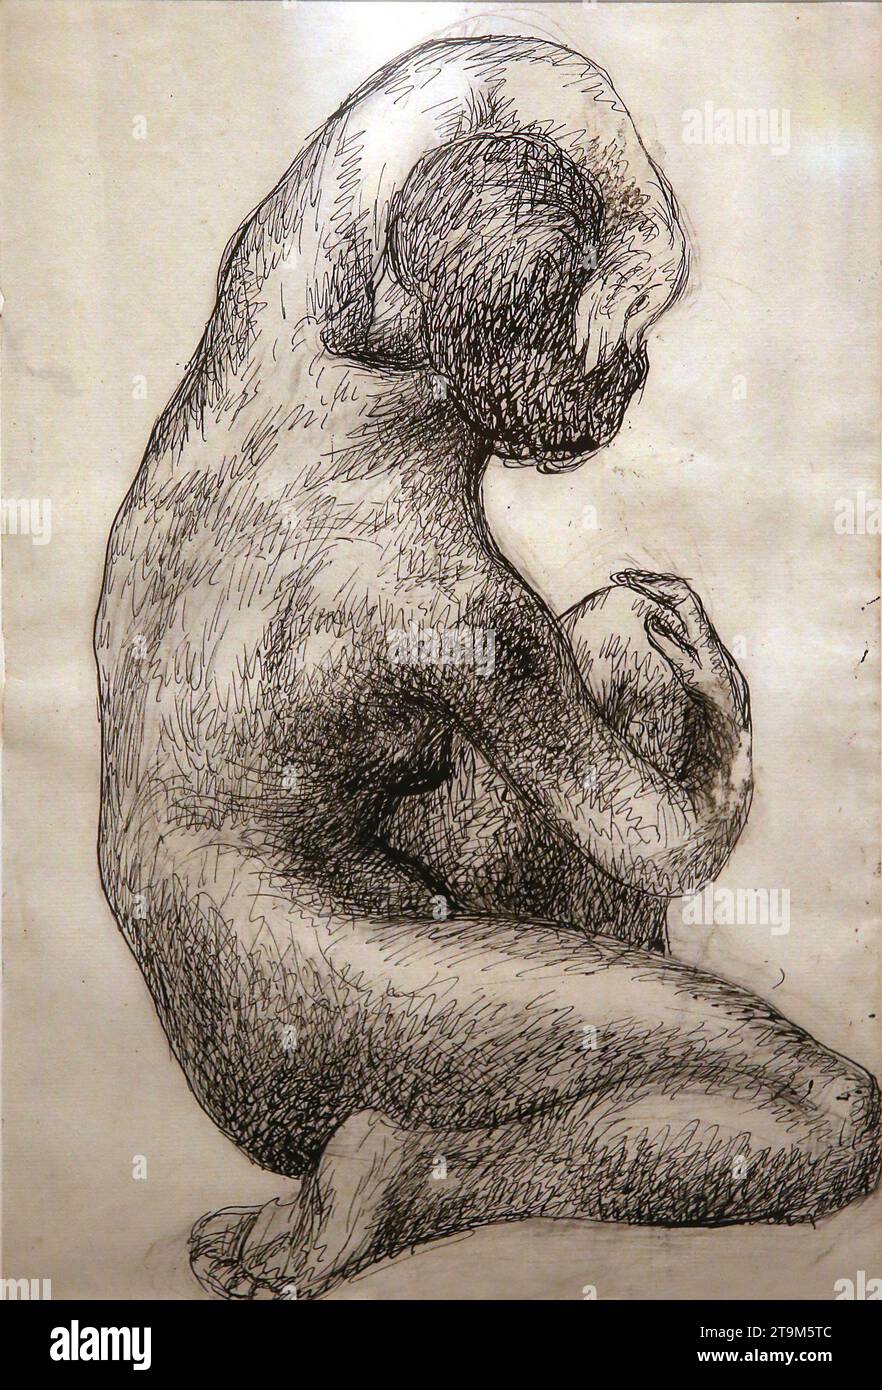 Study of a crouched woman. Sketch on paper by Pablo Gargallo (1881-1934) C. 1900. Montserrat Museum Barcelona, Catalonia, Spain. Stock Photo